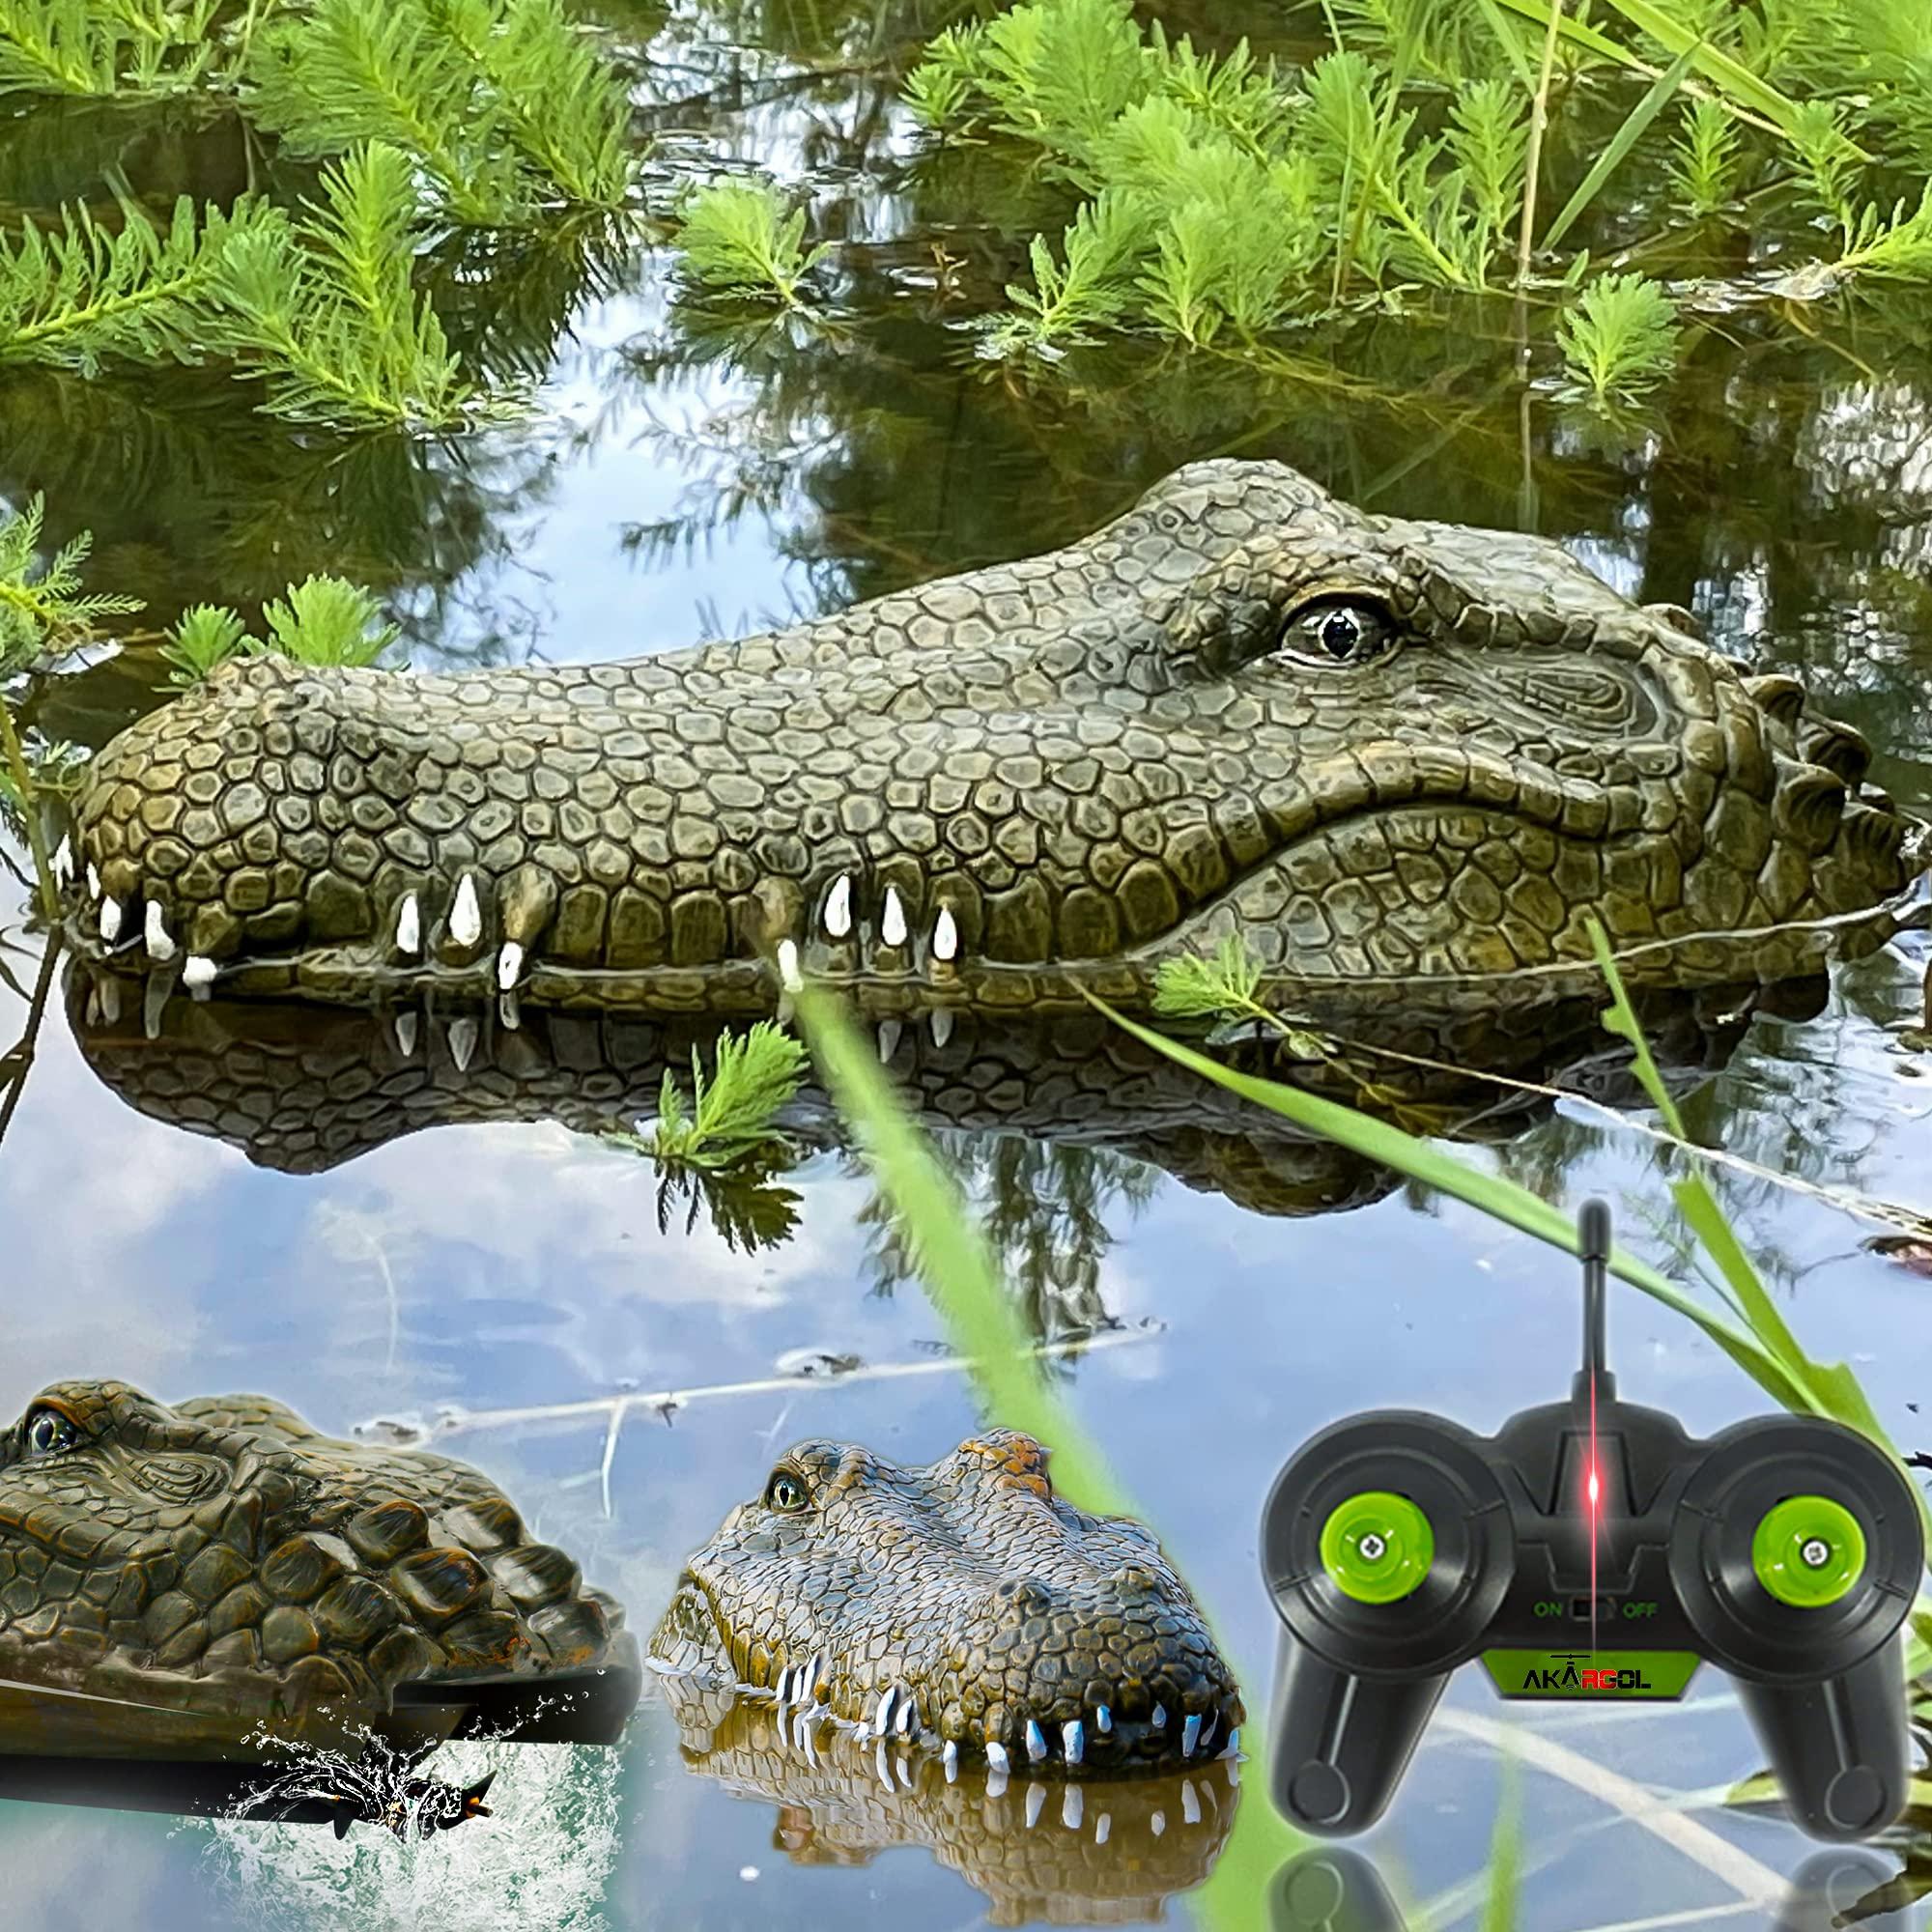 Rc Alligator Head:  Benefits and Comparison for Purchasing an RC Alligator Head